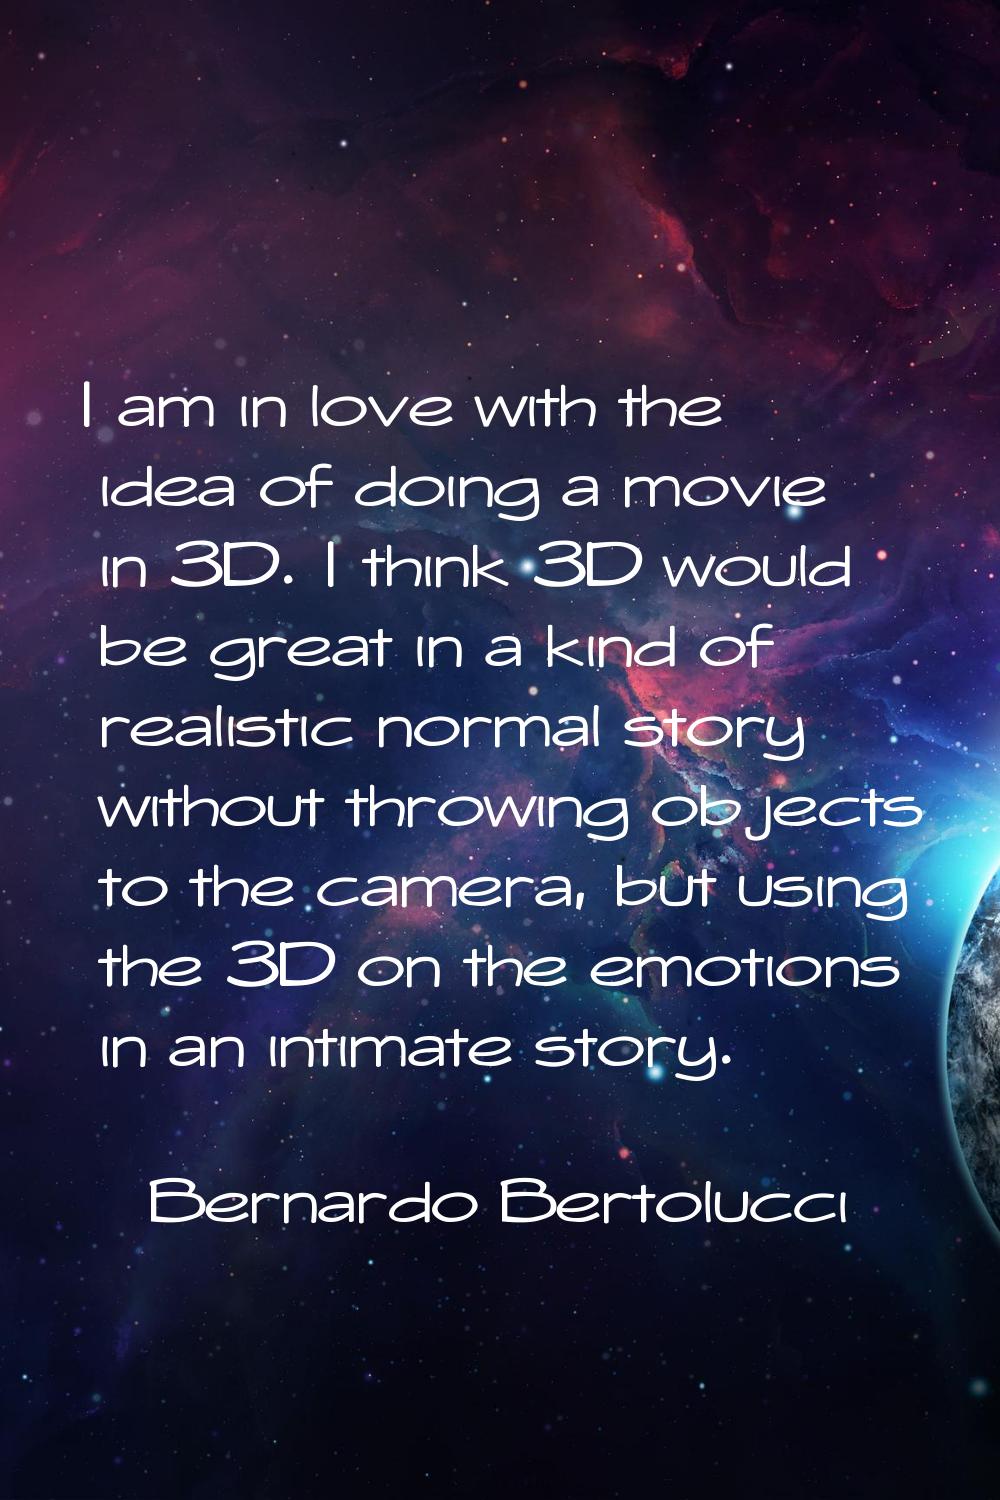 I am in love with the idea of doing a movie in 3D. I think 3D would be great in a kind of realistic